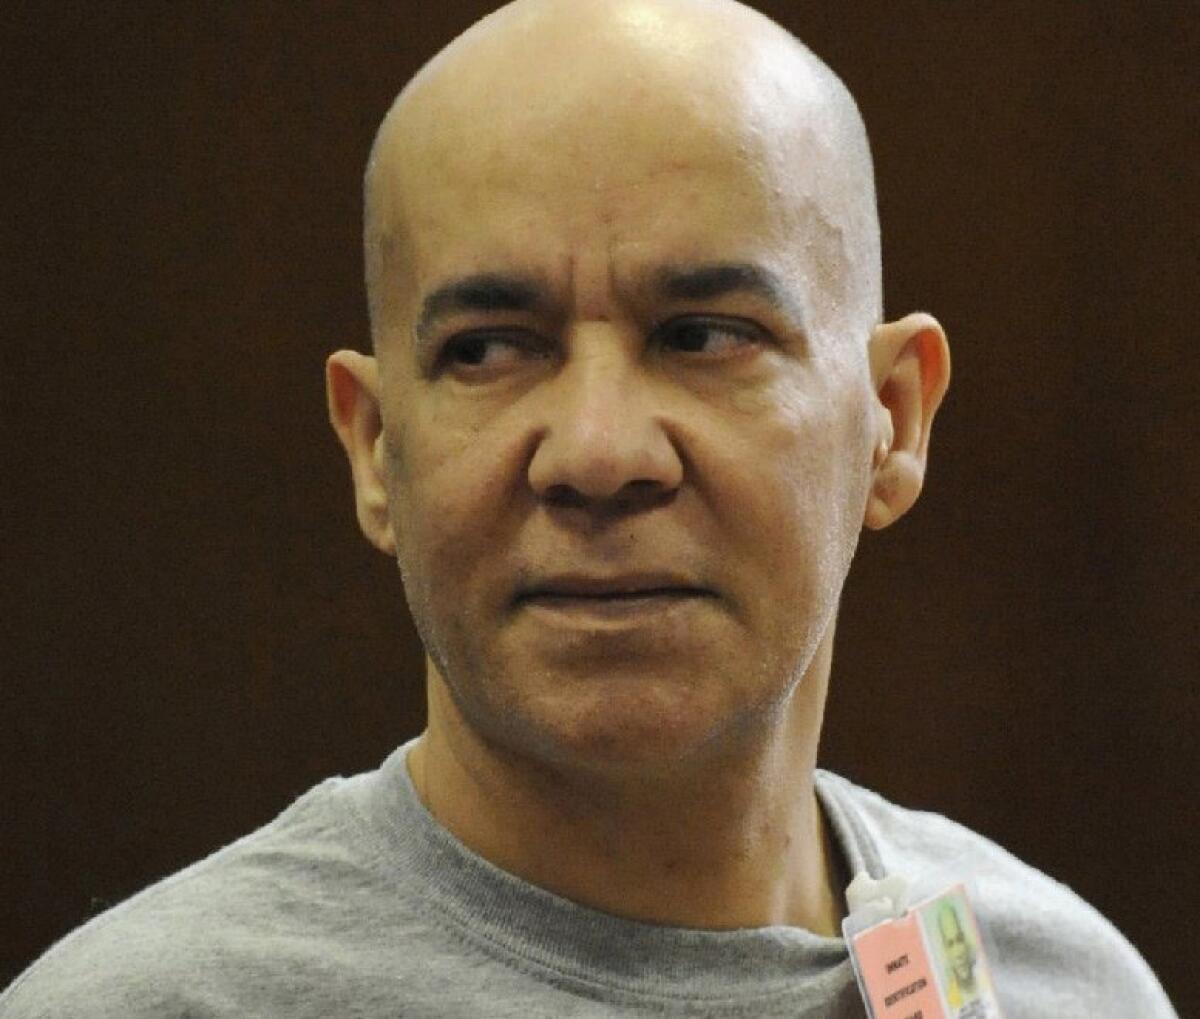 Pedro Hernandez will stand trial for the 1979 killing of 6-year-old Etan Patz.